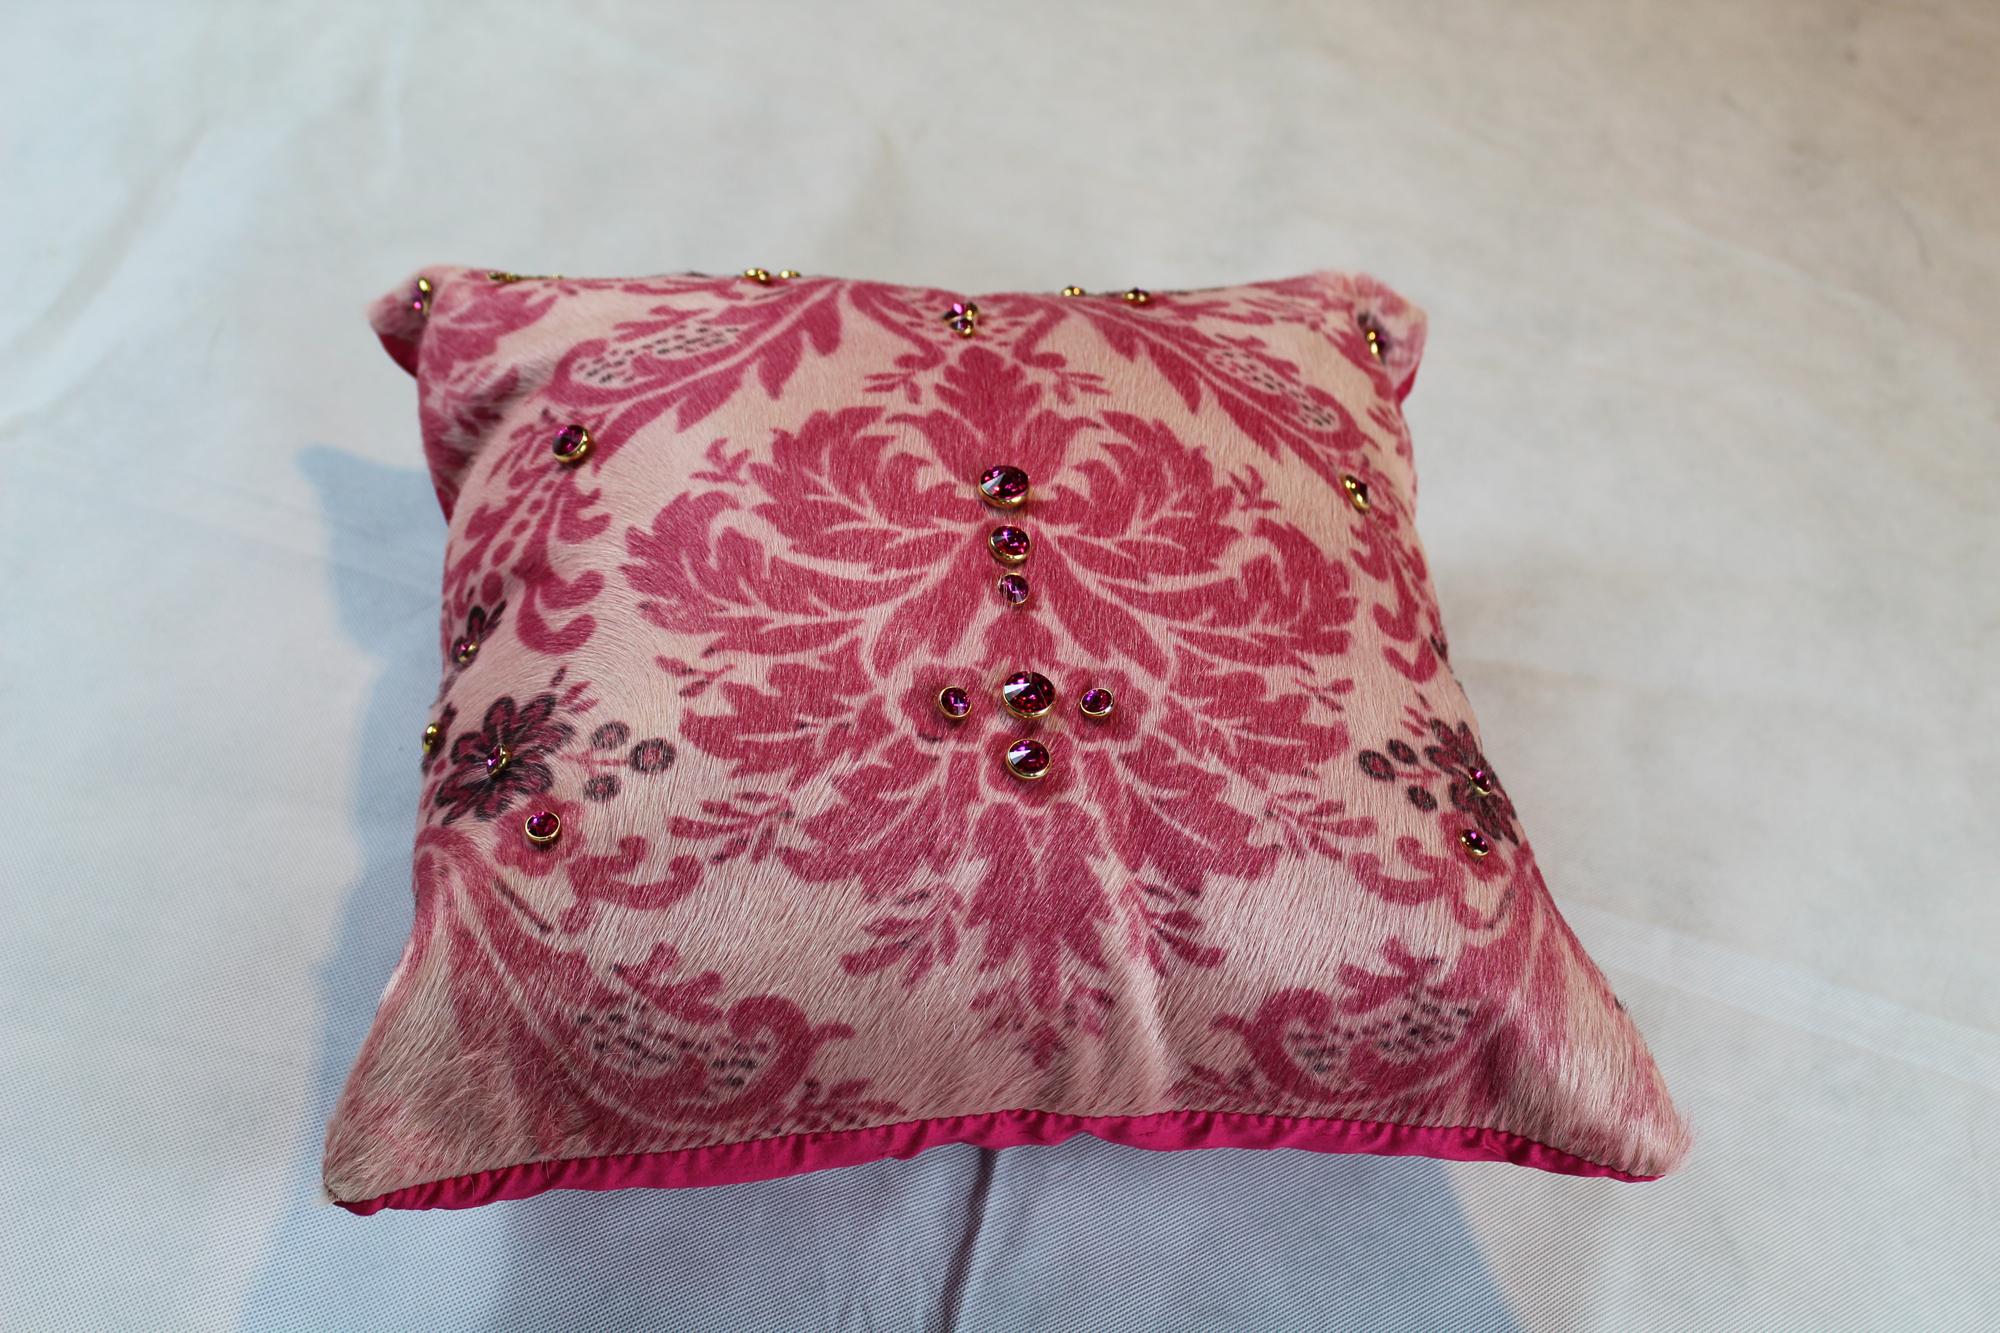 Pink cow leather cushion with hand-painted Damask pattern decorated with original Swarovski crystals.
Retro cushion covered in Shantung fabric in Fuchsia silk.
Entirely made in Italy.